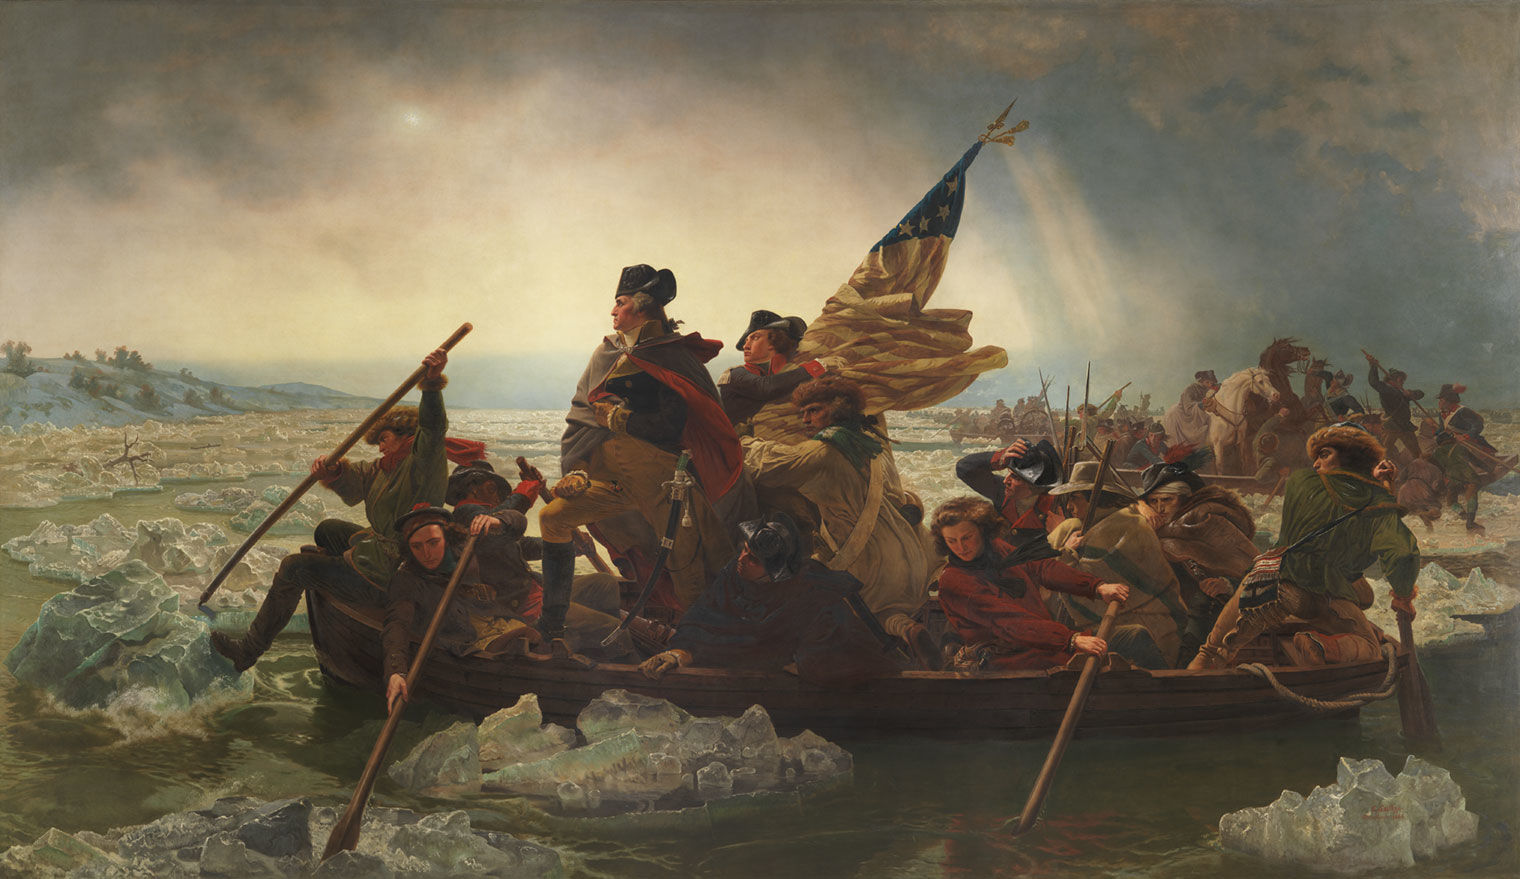 A majestic painting of a boat being rowed across an icy river, with George Washington standing in the front